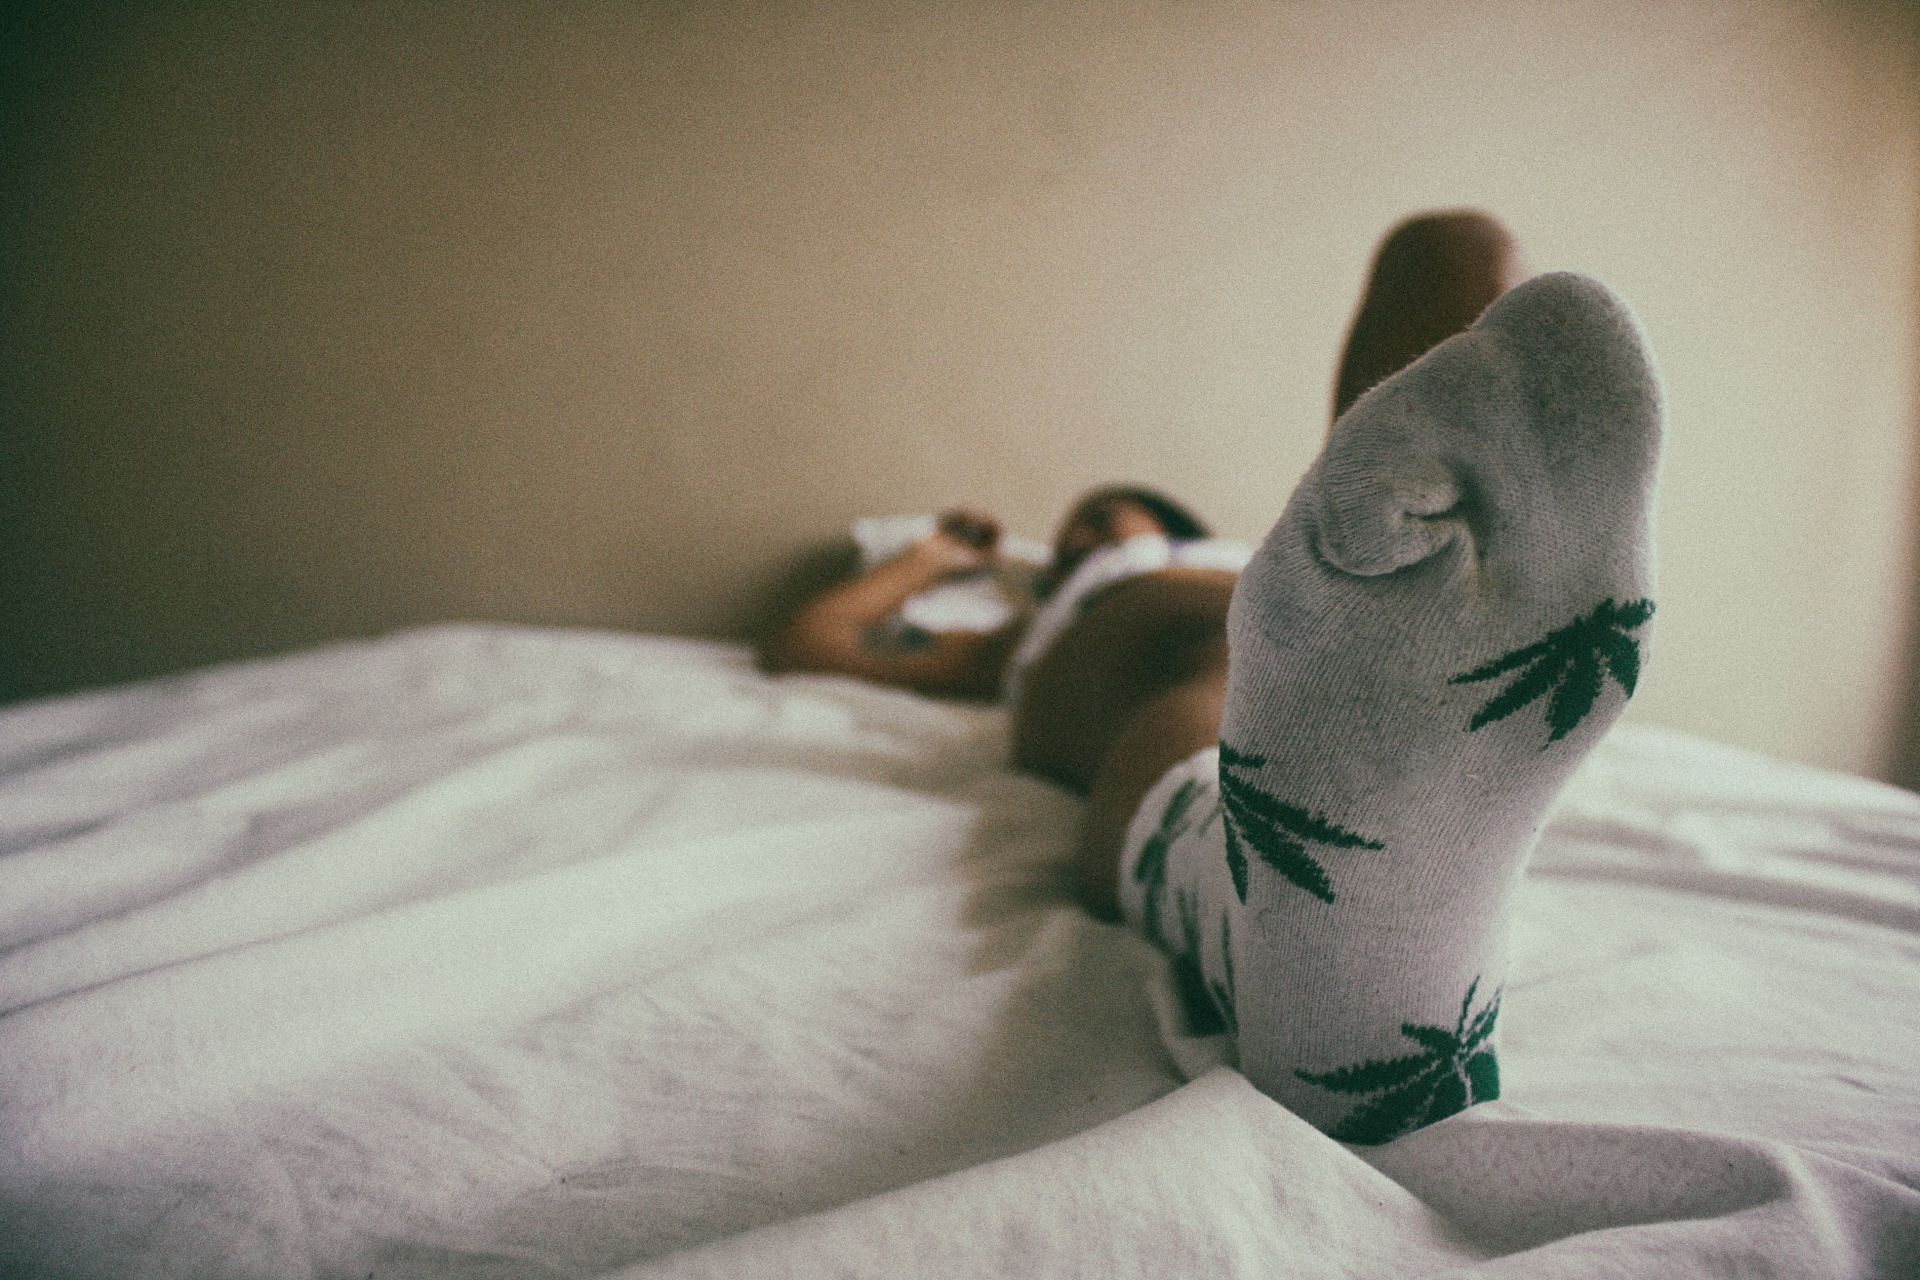 Iron deficiency is also to be blamed for chilly feet. (Image via Pexels/ Matheus Ferrero)